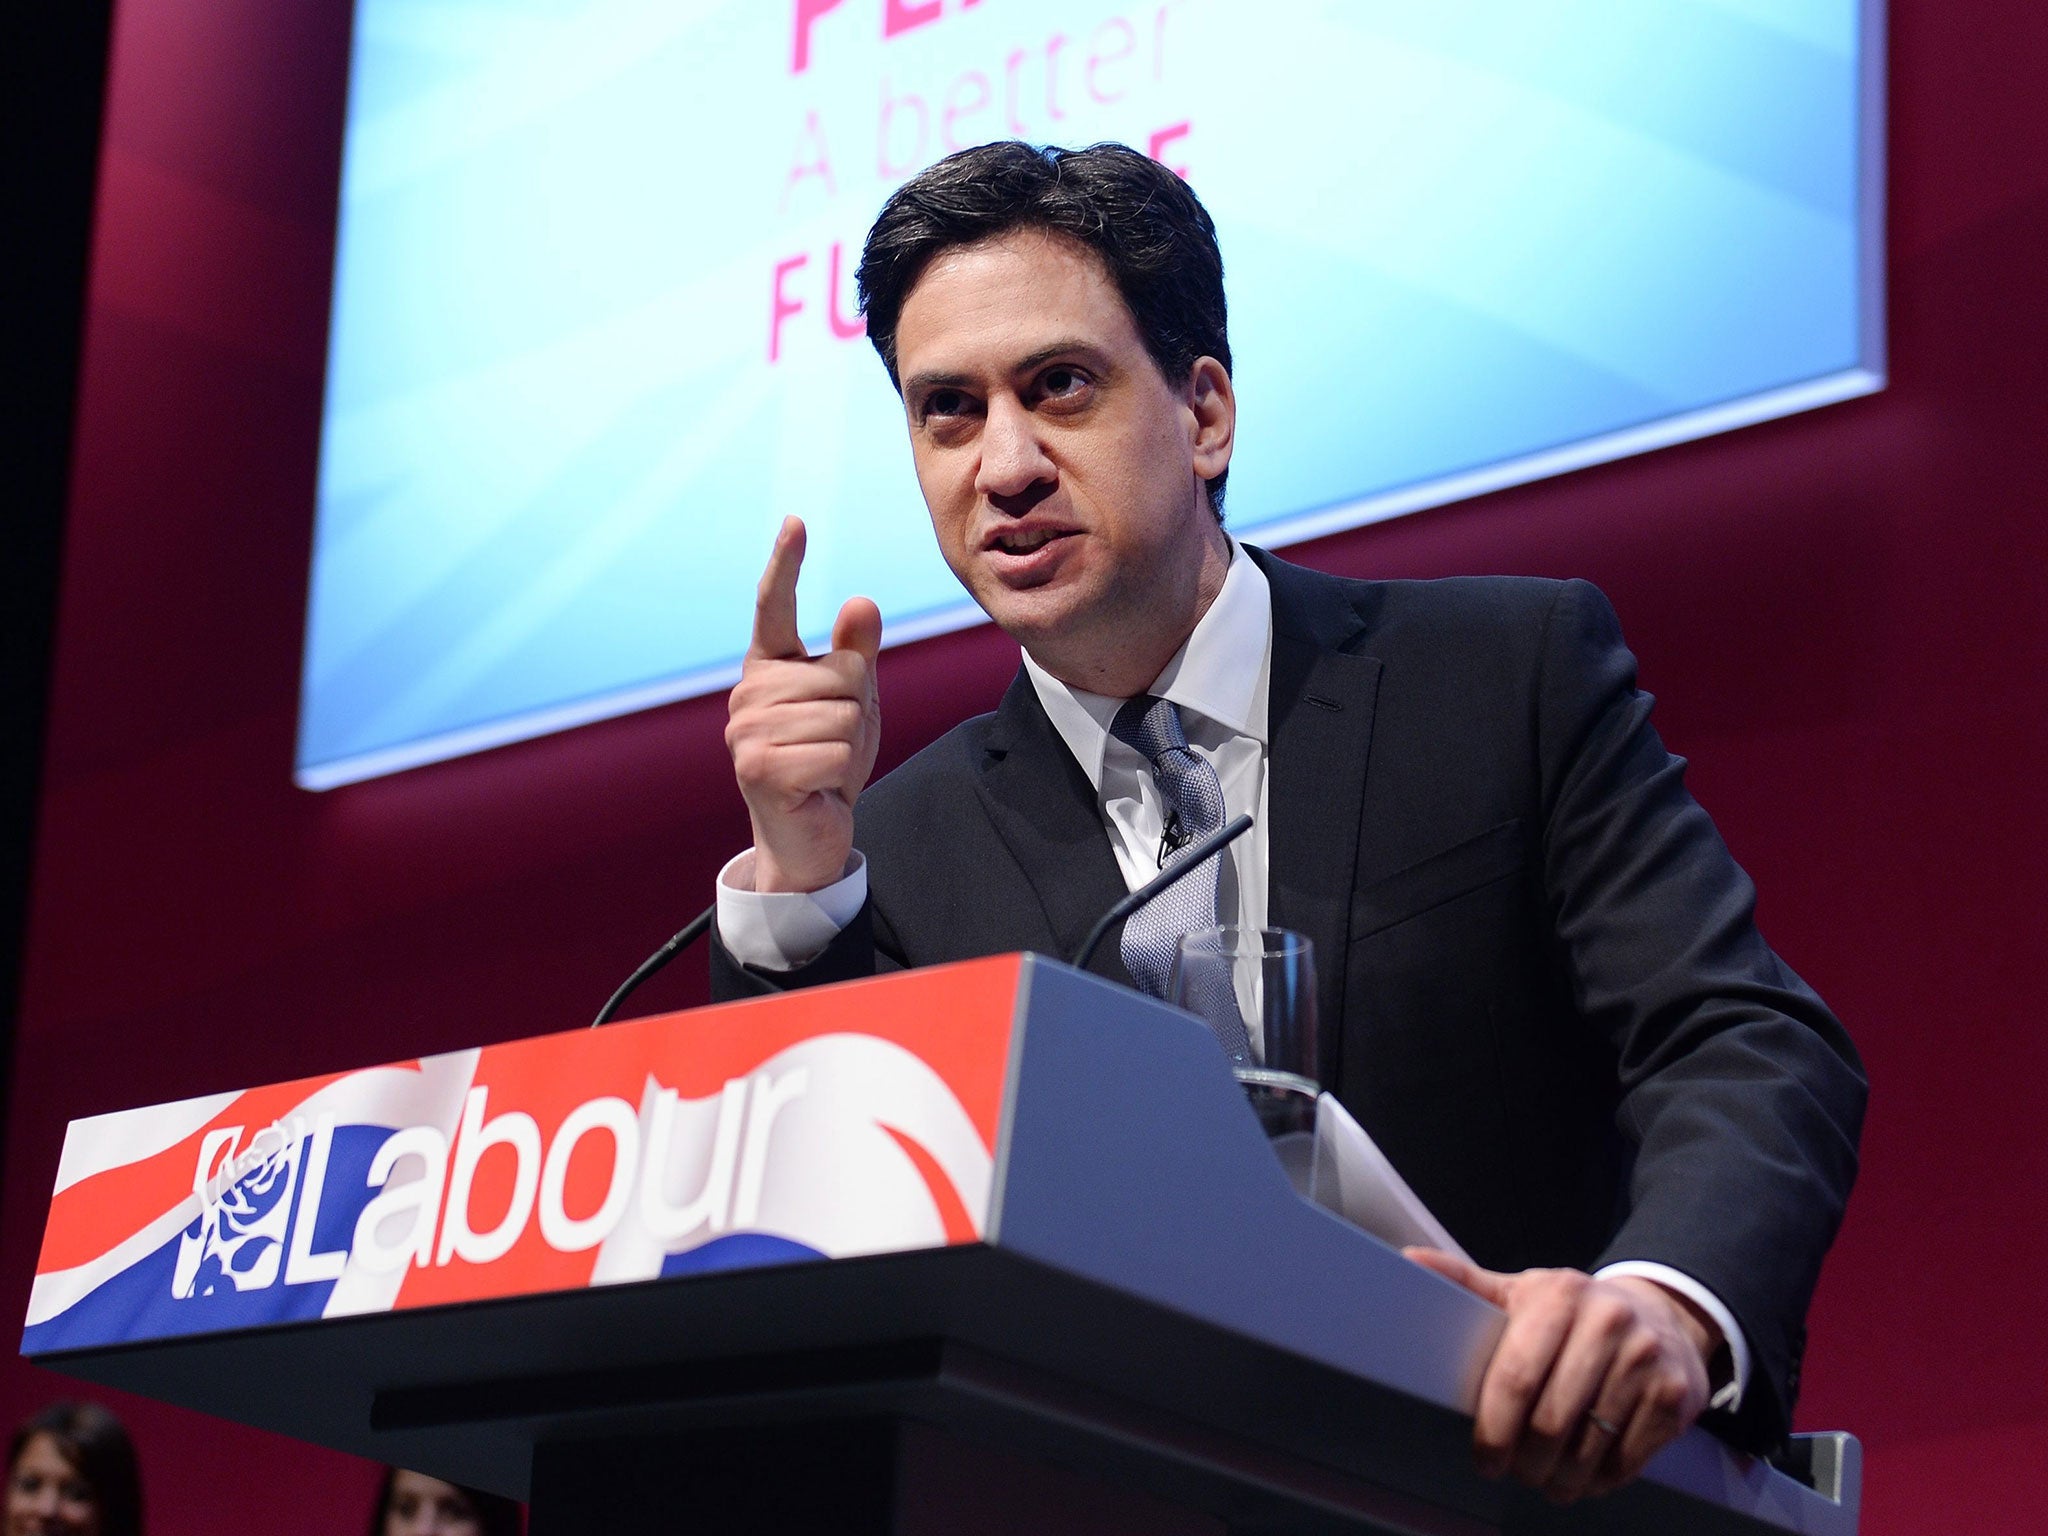 Ed Miliband has made “standing up” to Rupert Murdoch over the phone-hacking affair a central plank in his attempts to persuade voters that he is a strong leader